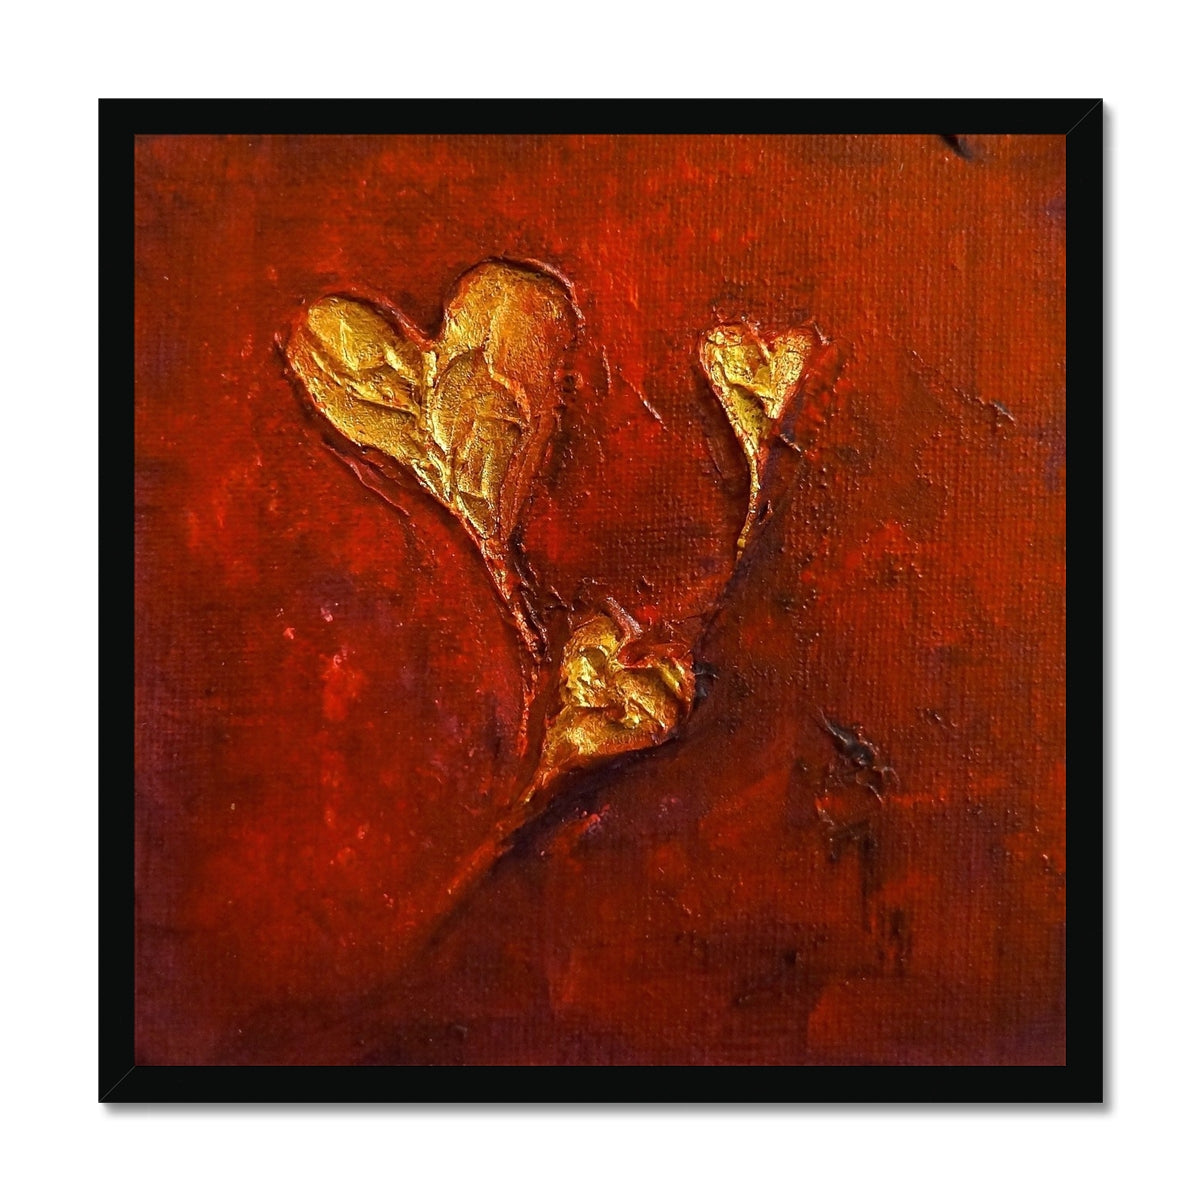 Hearts Abstract Painting | Framed Prints From Scotland-Framed Prints-Abstract & Impressionistic Art Gallery-20"x20"-Black Frame-Paintings, Prints, Homeware, Art Gifts From Scotland By Scottish Artist Kevin Hunter